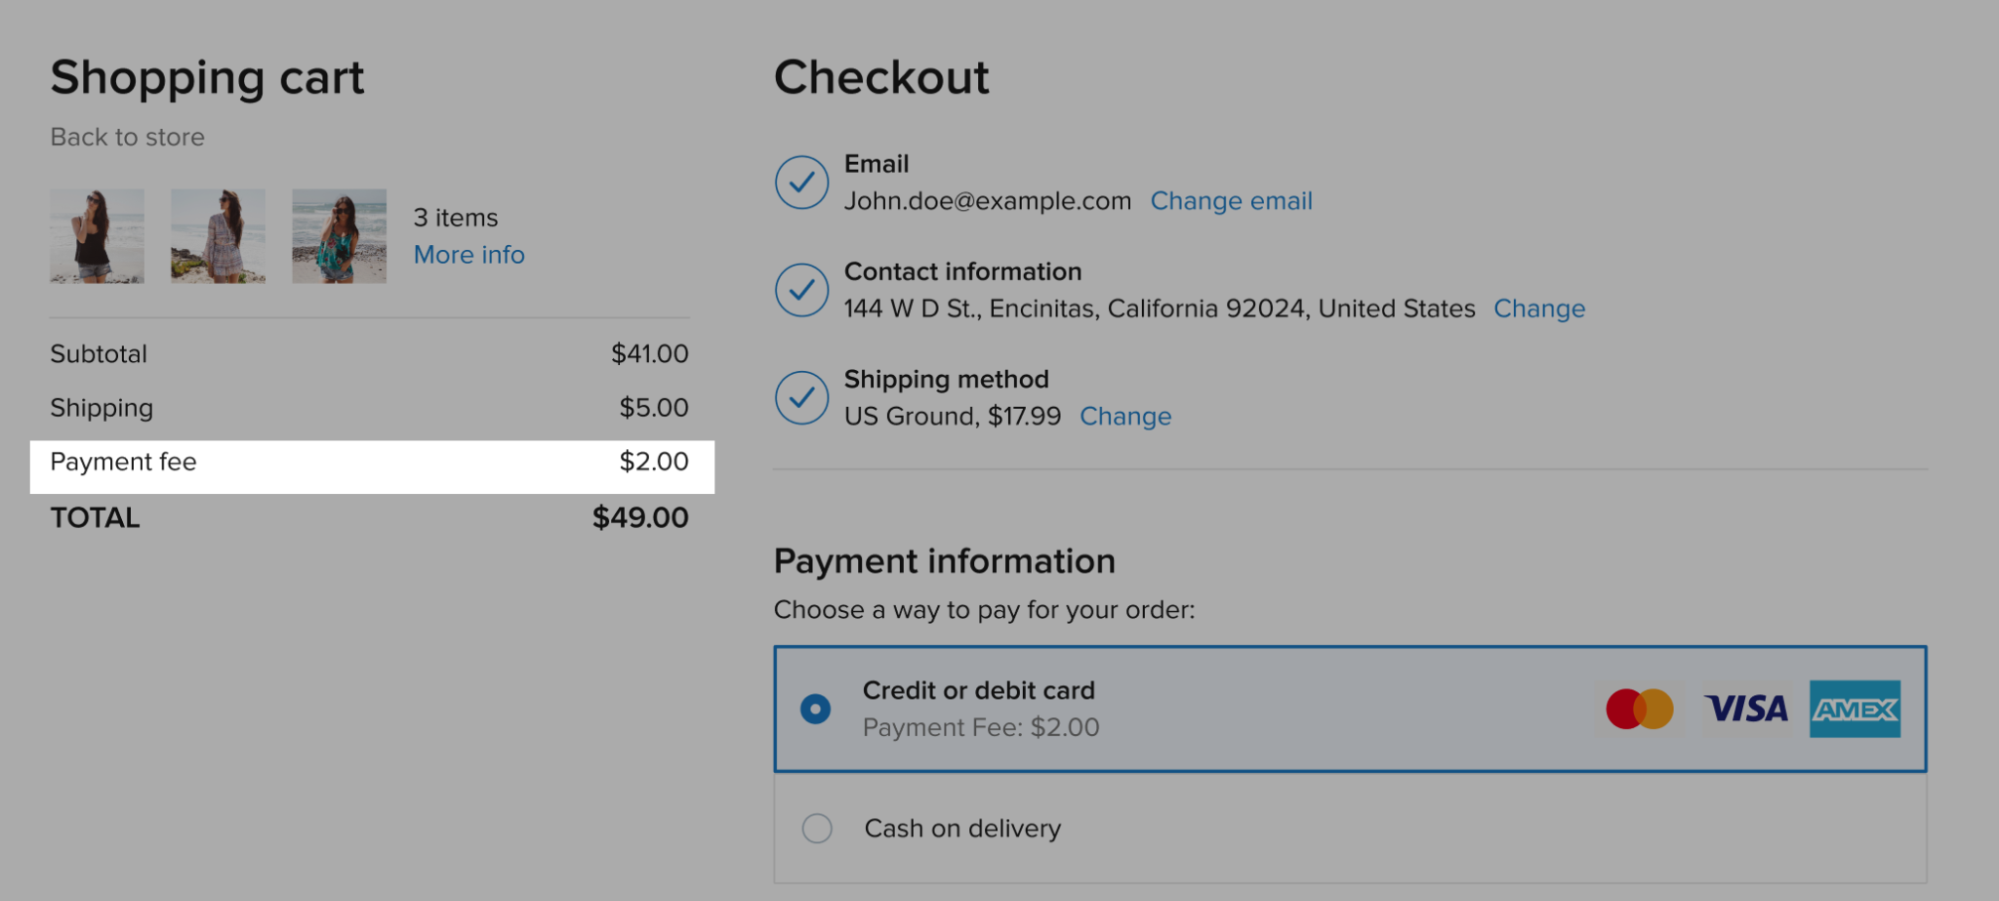 Adding_payment-based_fees_at_checkout.png